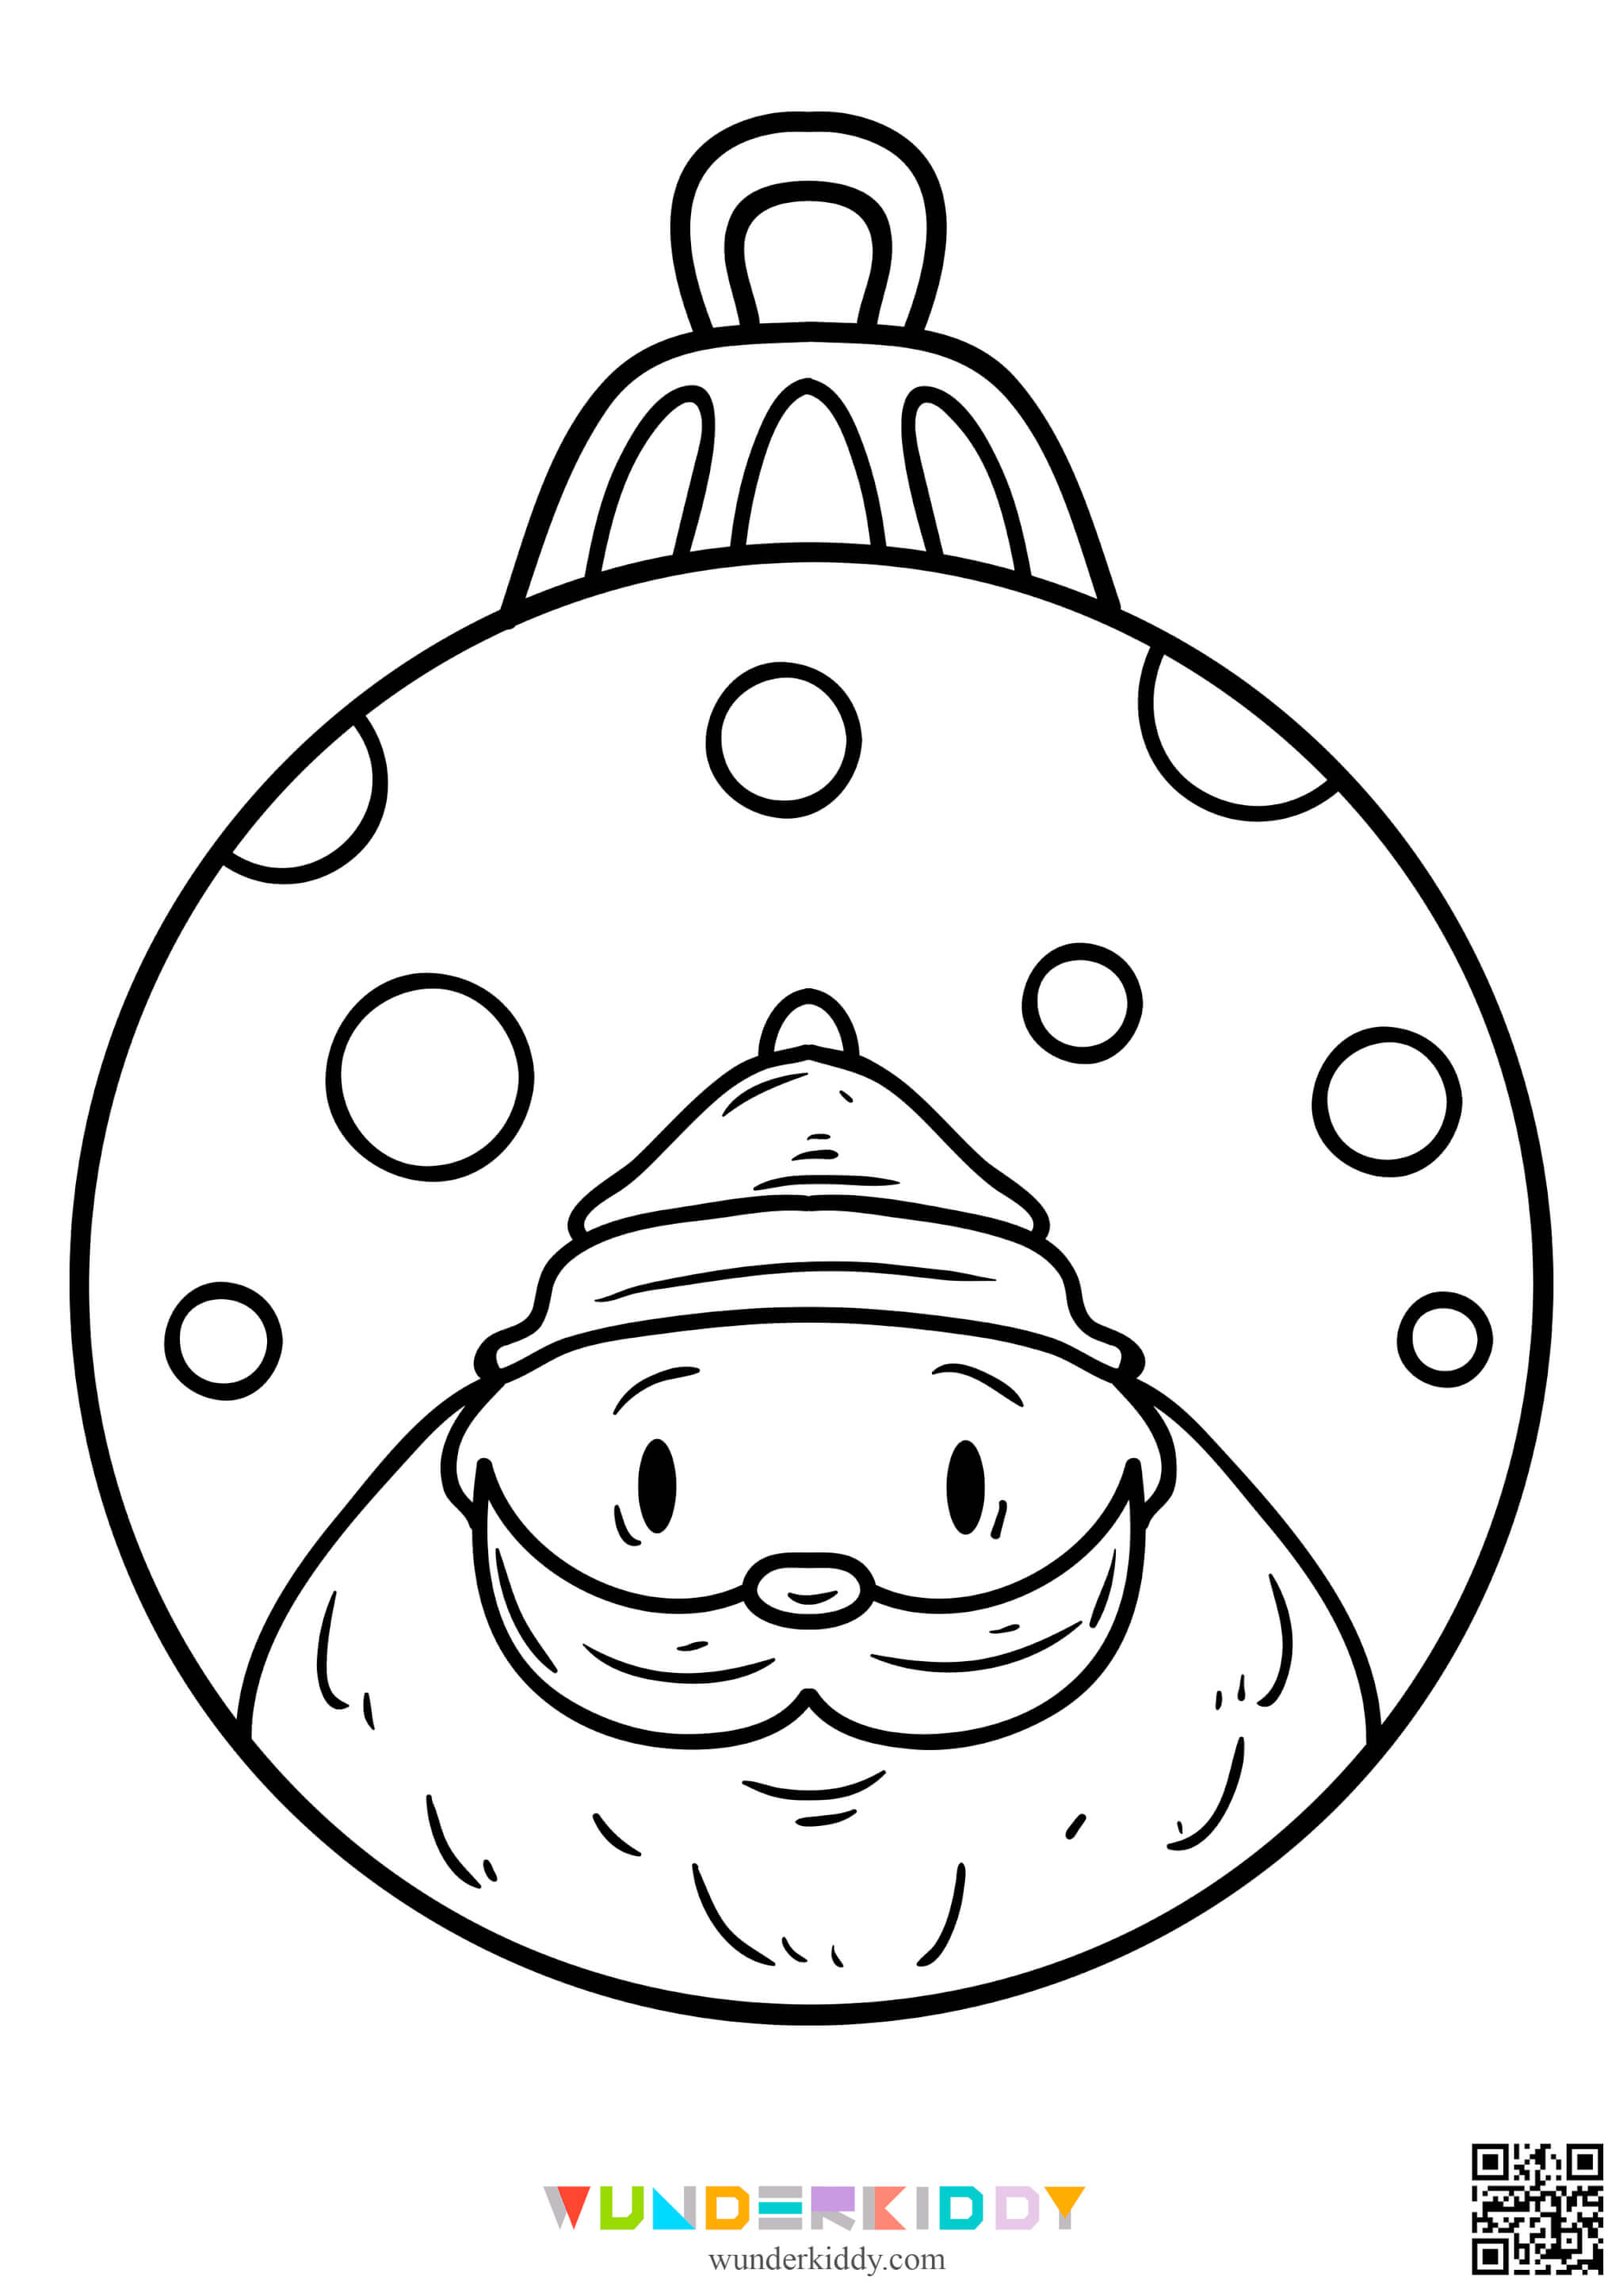 Christmas Ornament Coloring Pages - Image 6